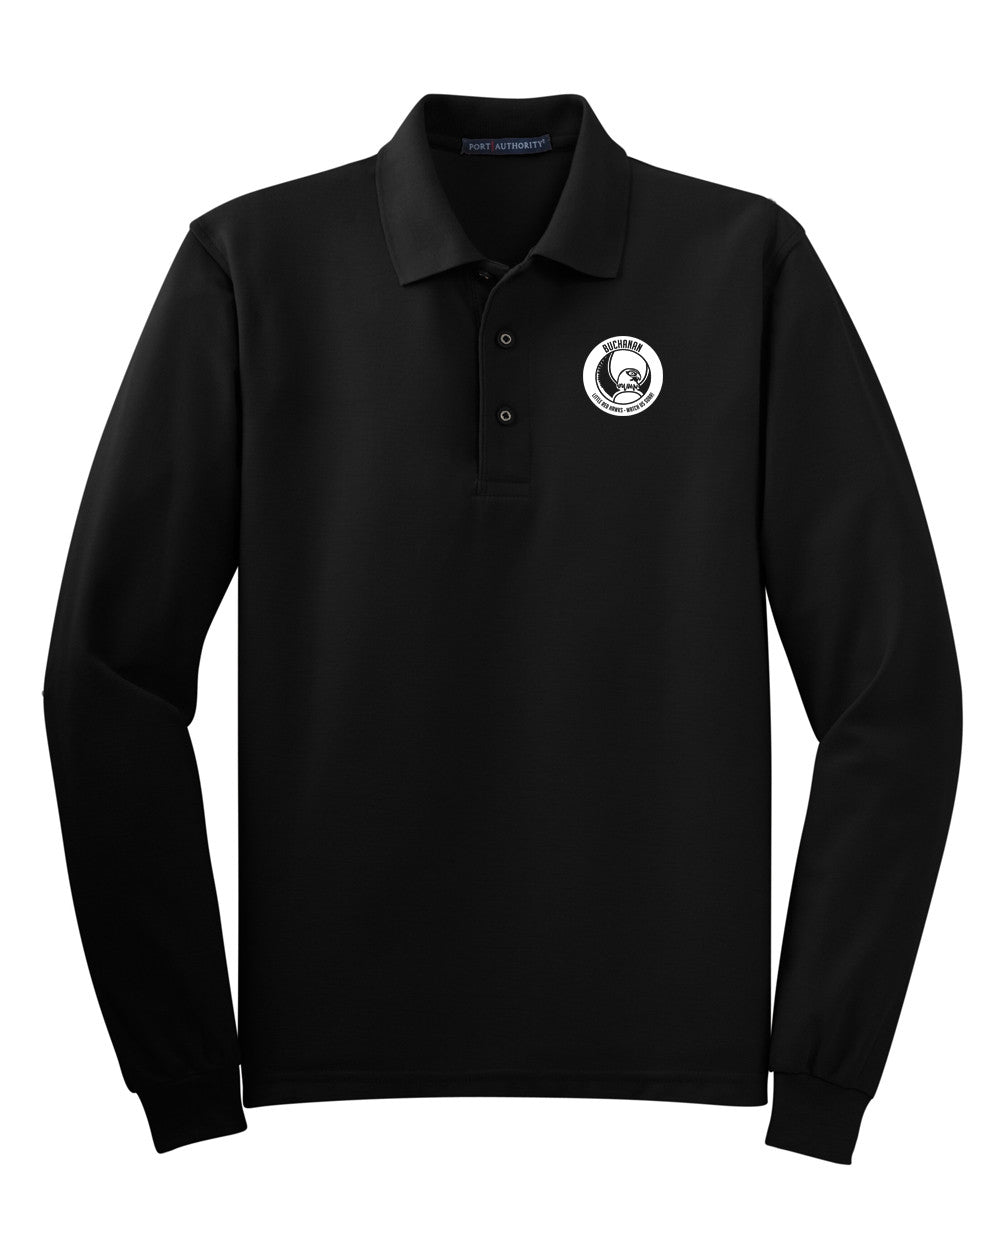 South West Community Campus Long Sleeve Polo